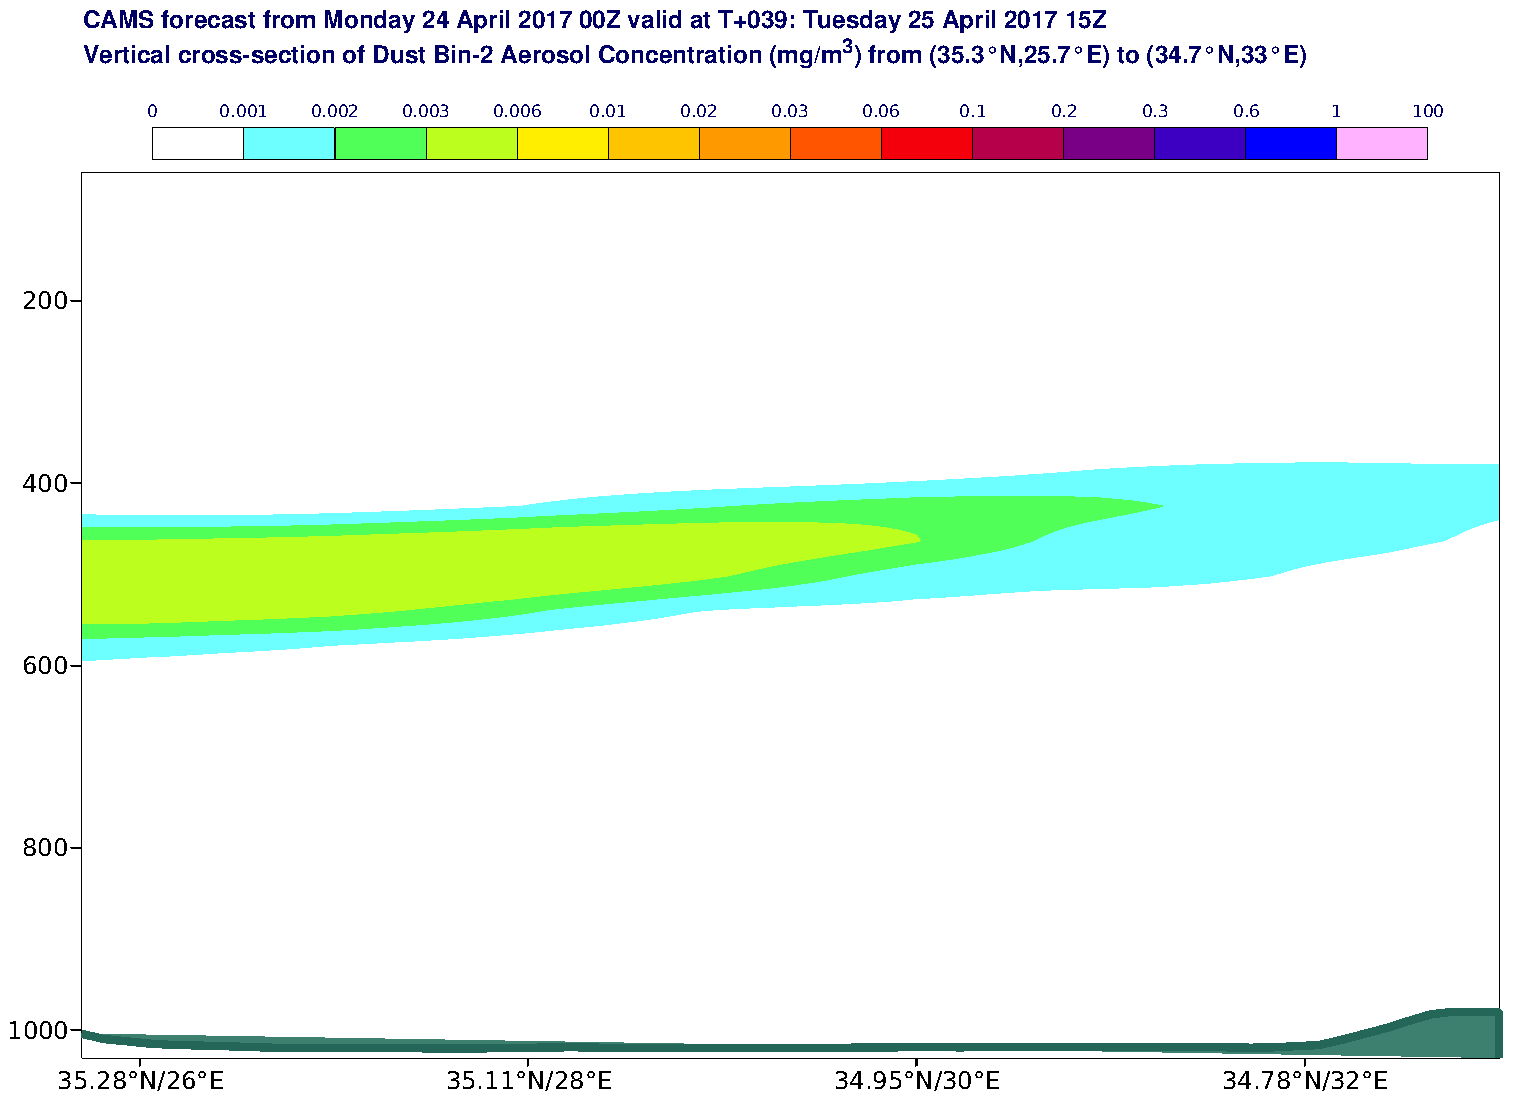 Vertical cross-section of Dust Bin-2 Aerosol Concentration (mg/m3) valid at T39 - 2017-04-25 15:00